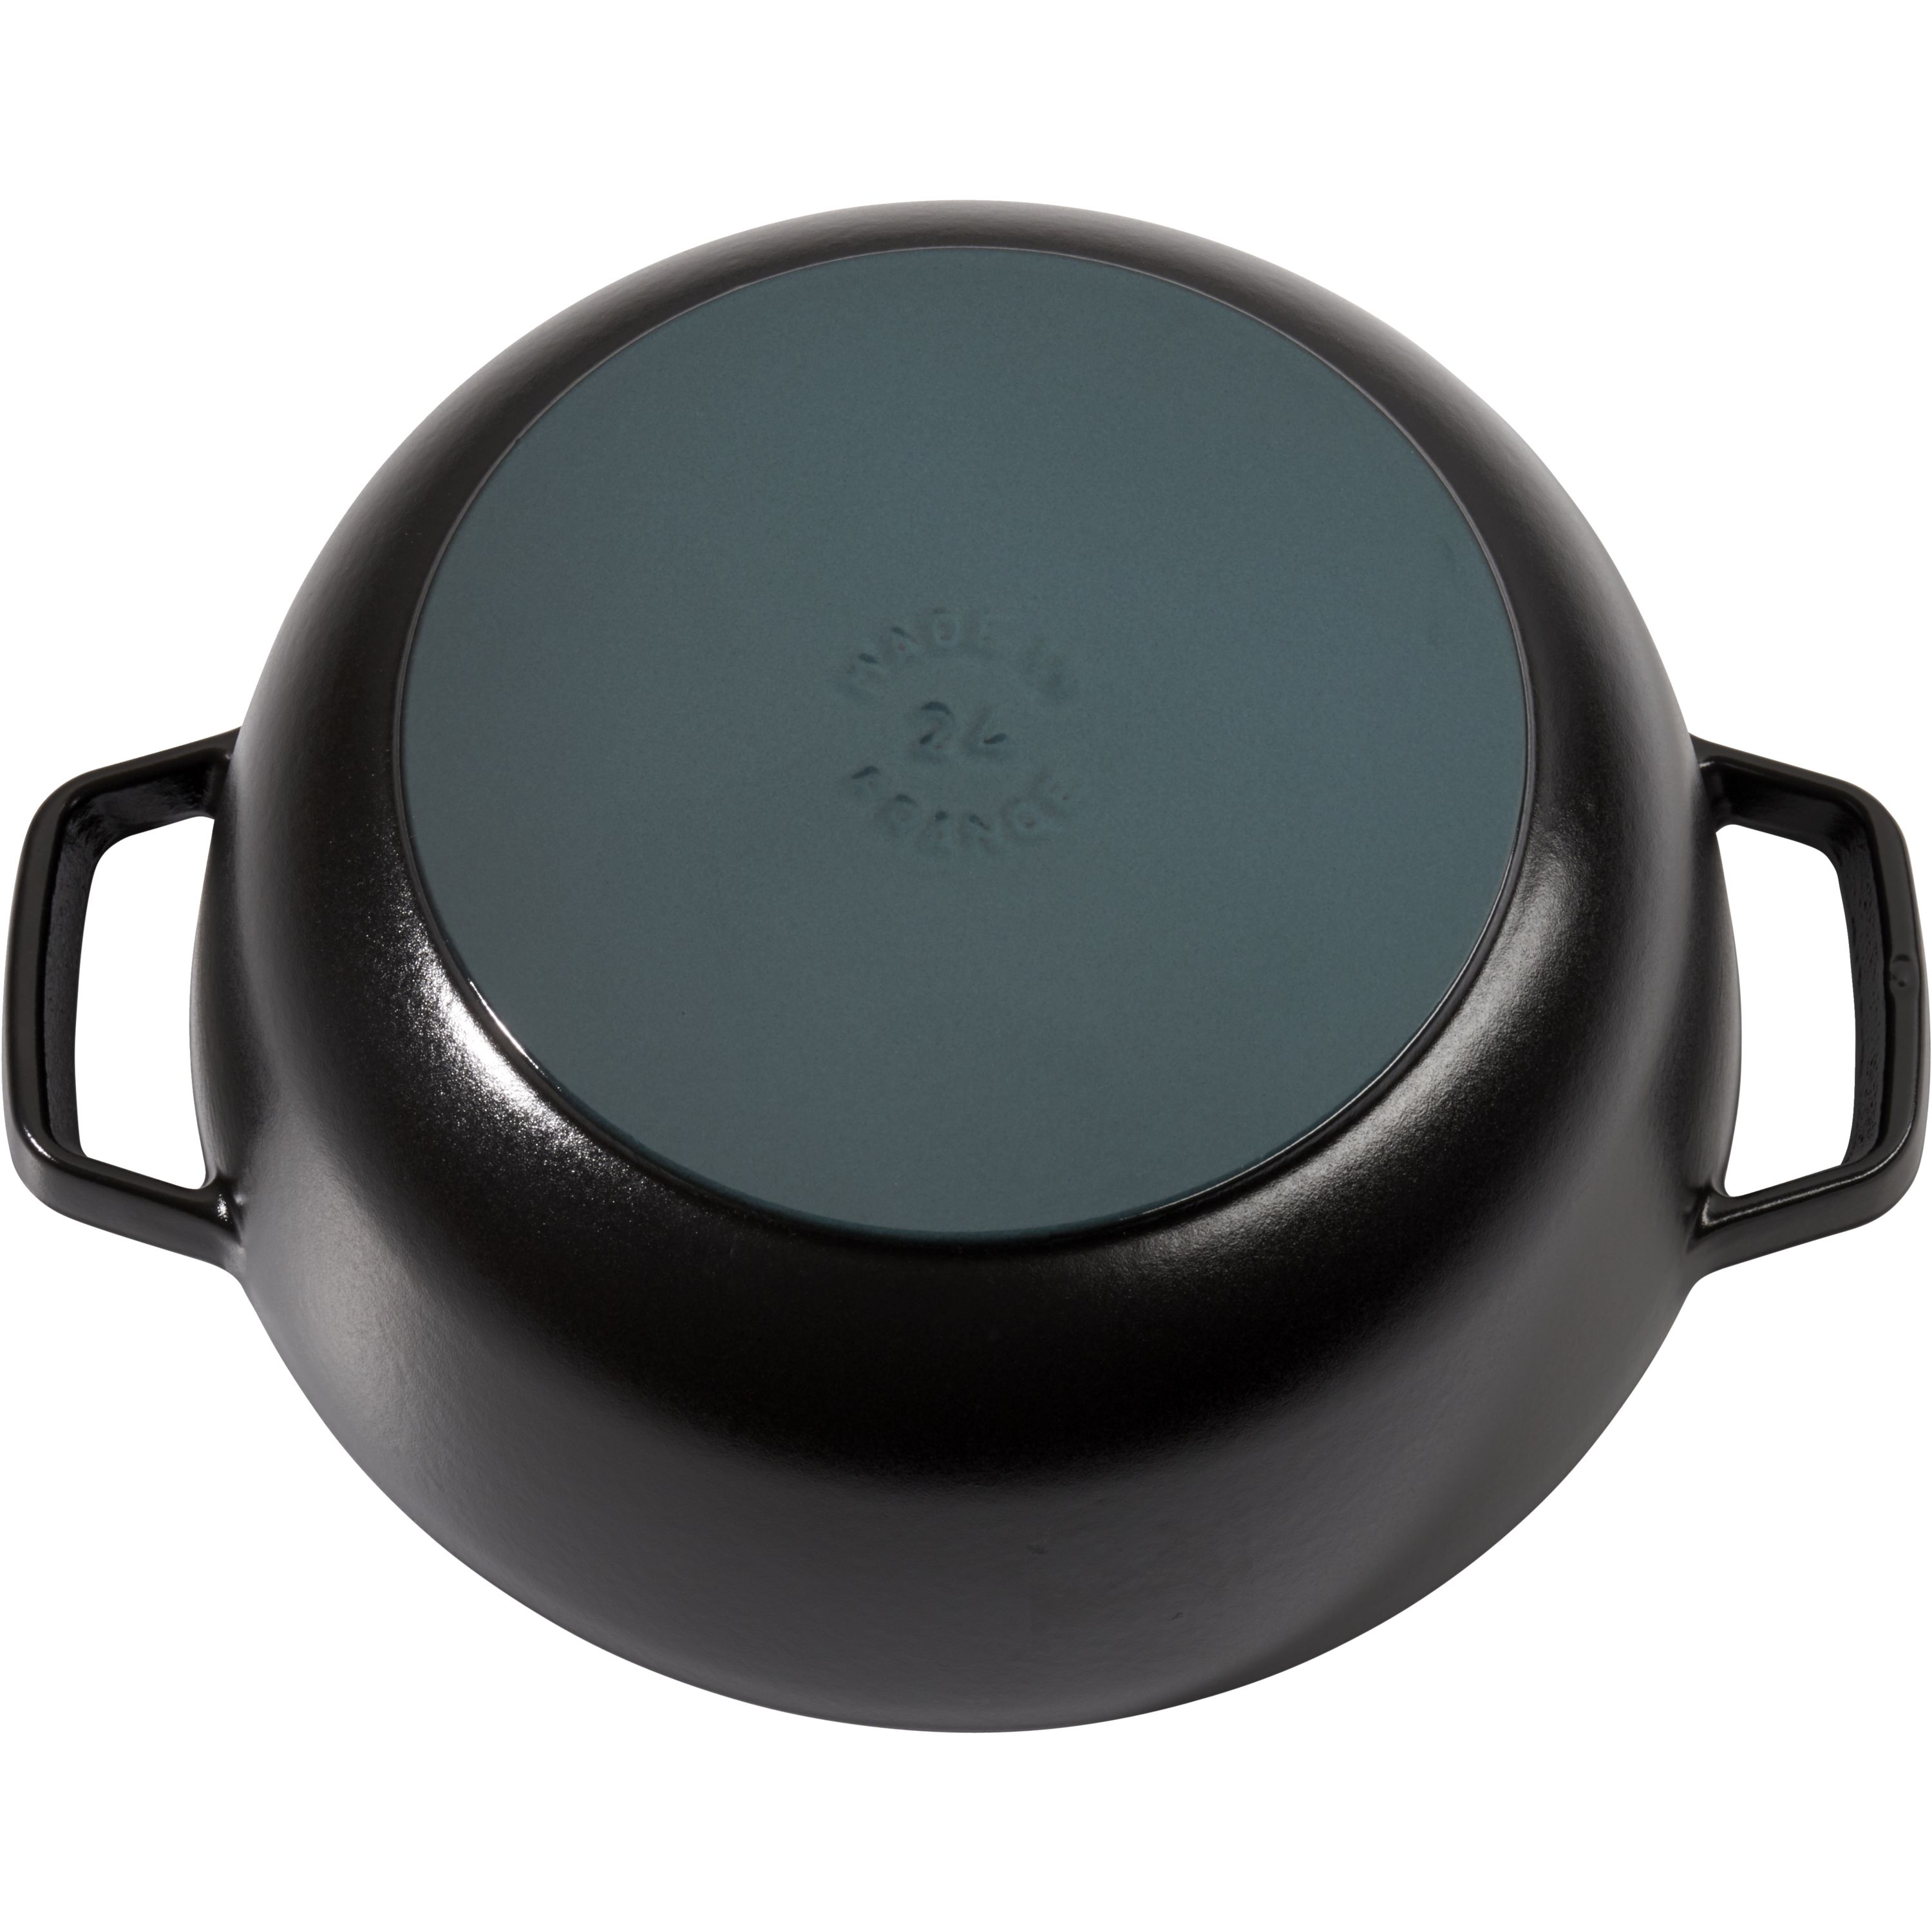  Staub Cast Iron 0.75-qt Petite French Oven - Matte Black, Made  in France: Home & Kitchen